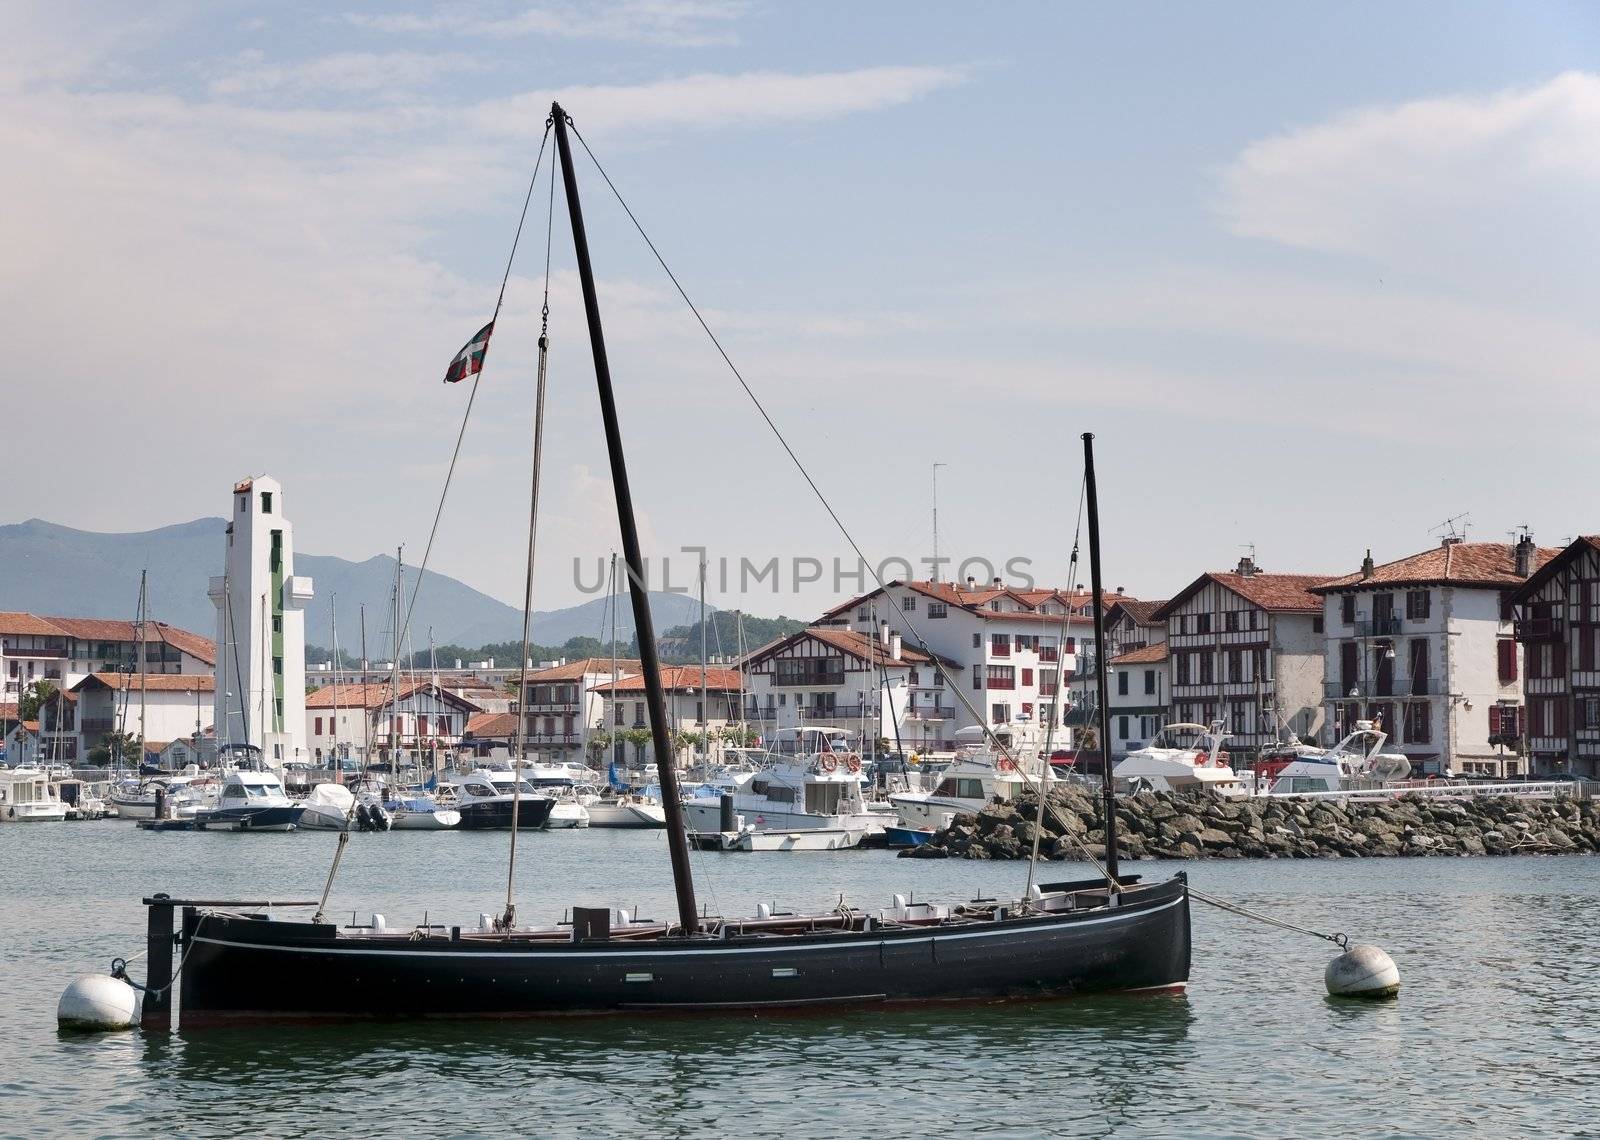 One black boat with one mast and a marina in the background